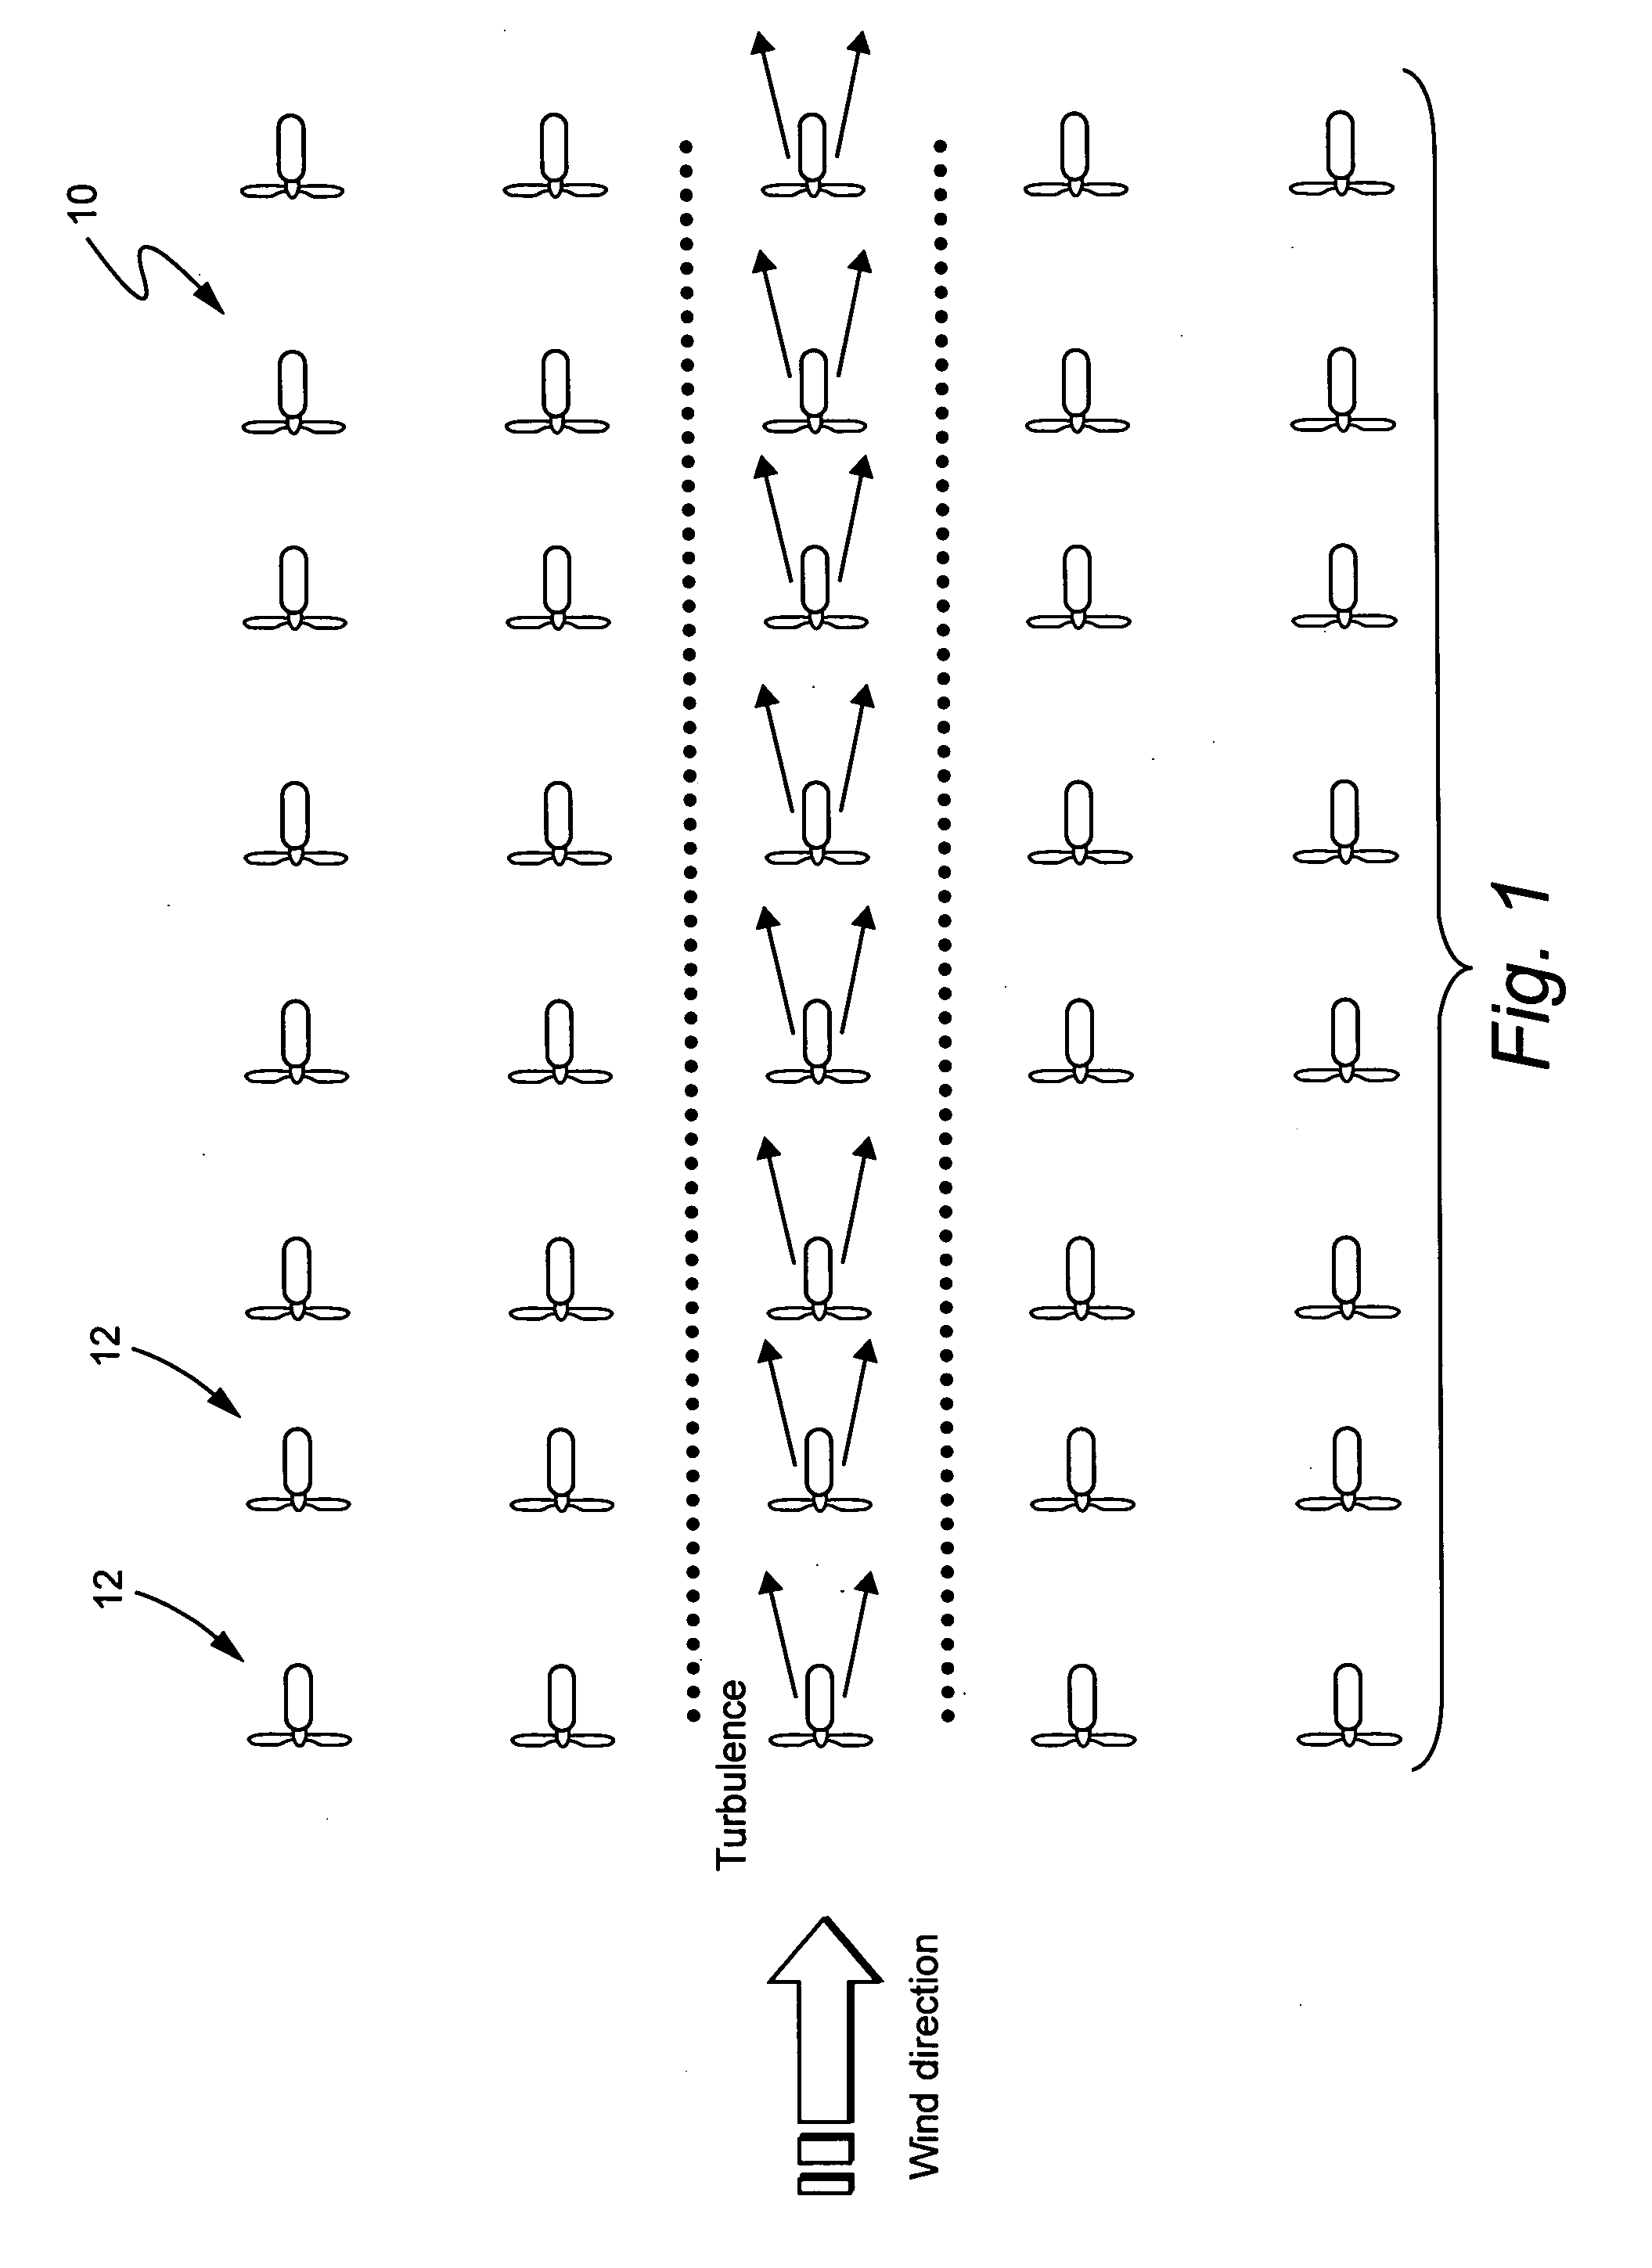 Windpark turbine control system and method for wind condition estimation and performance optimization